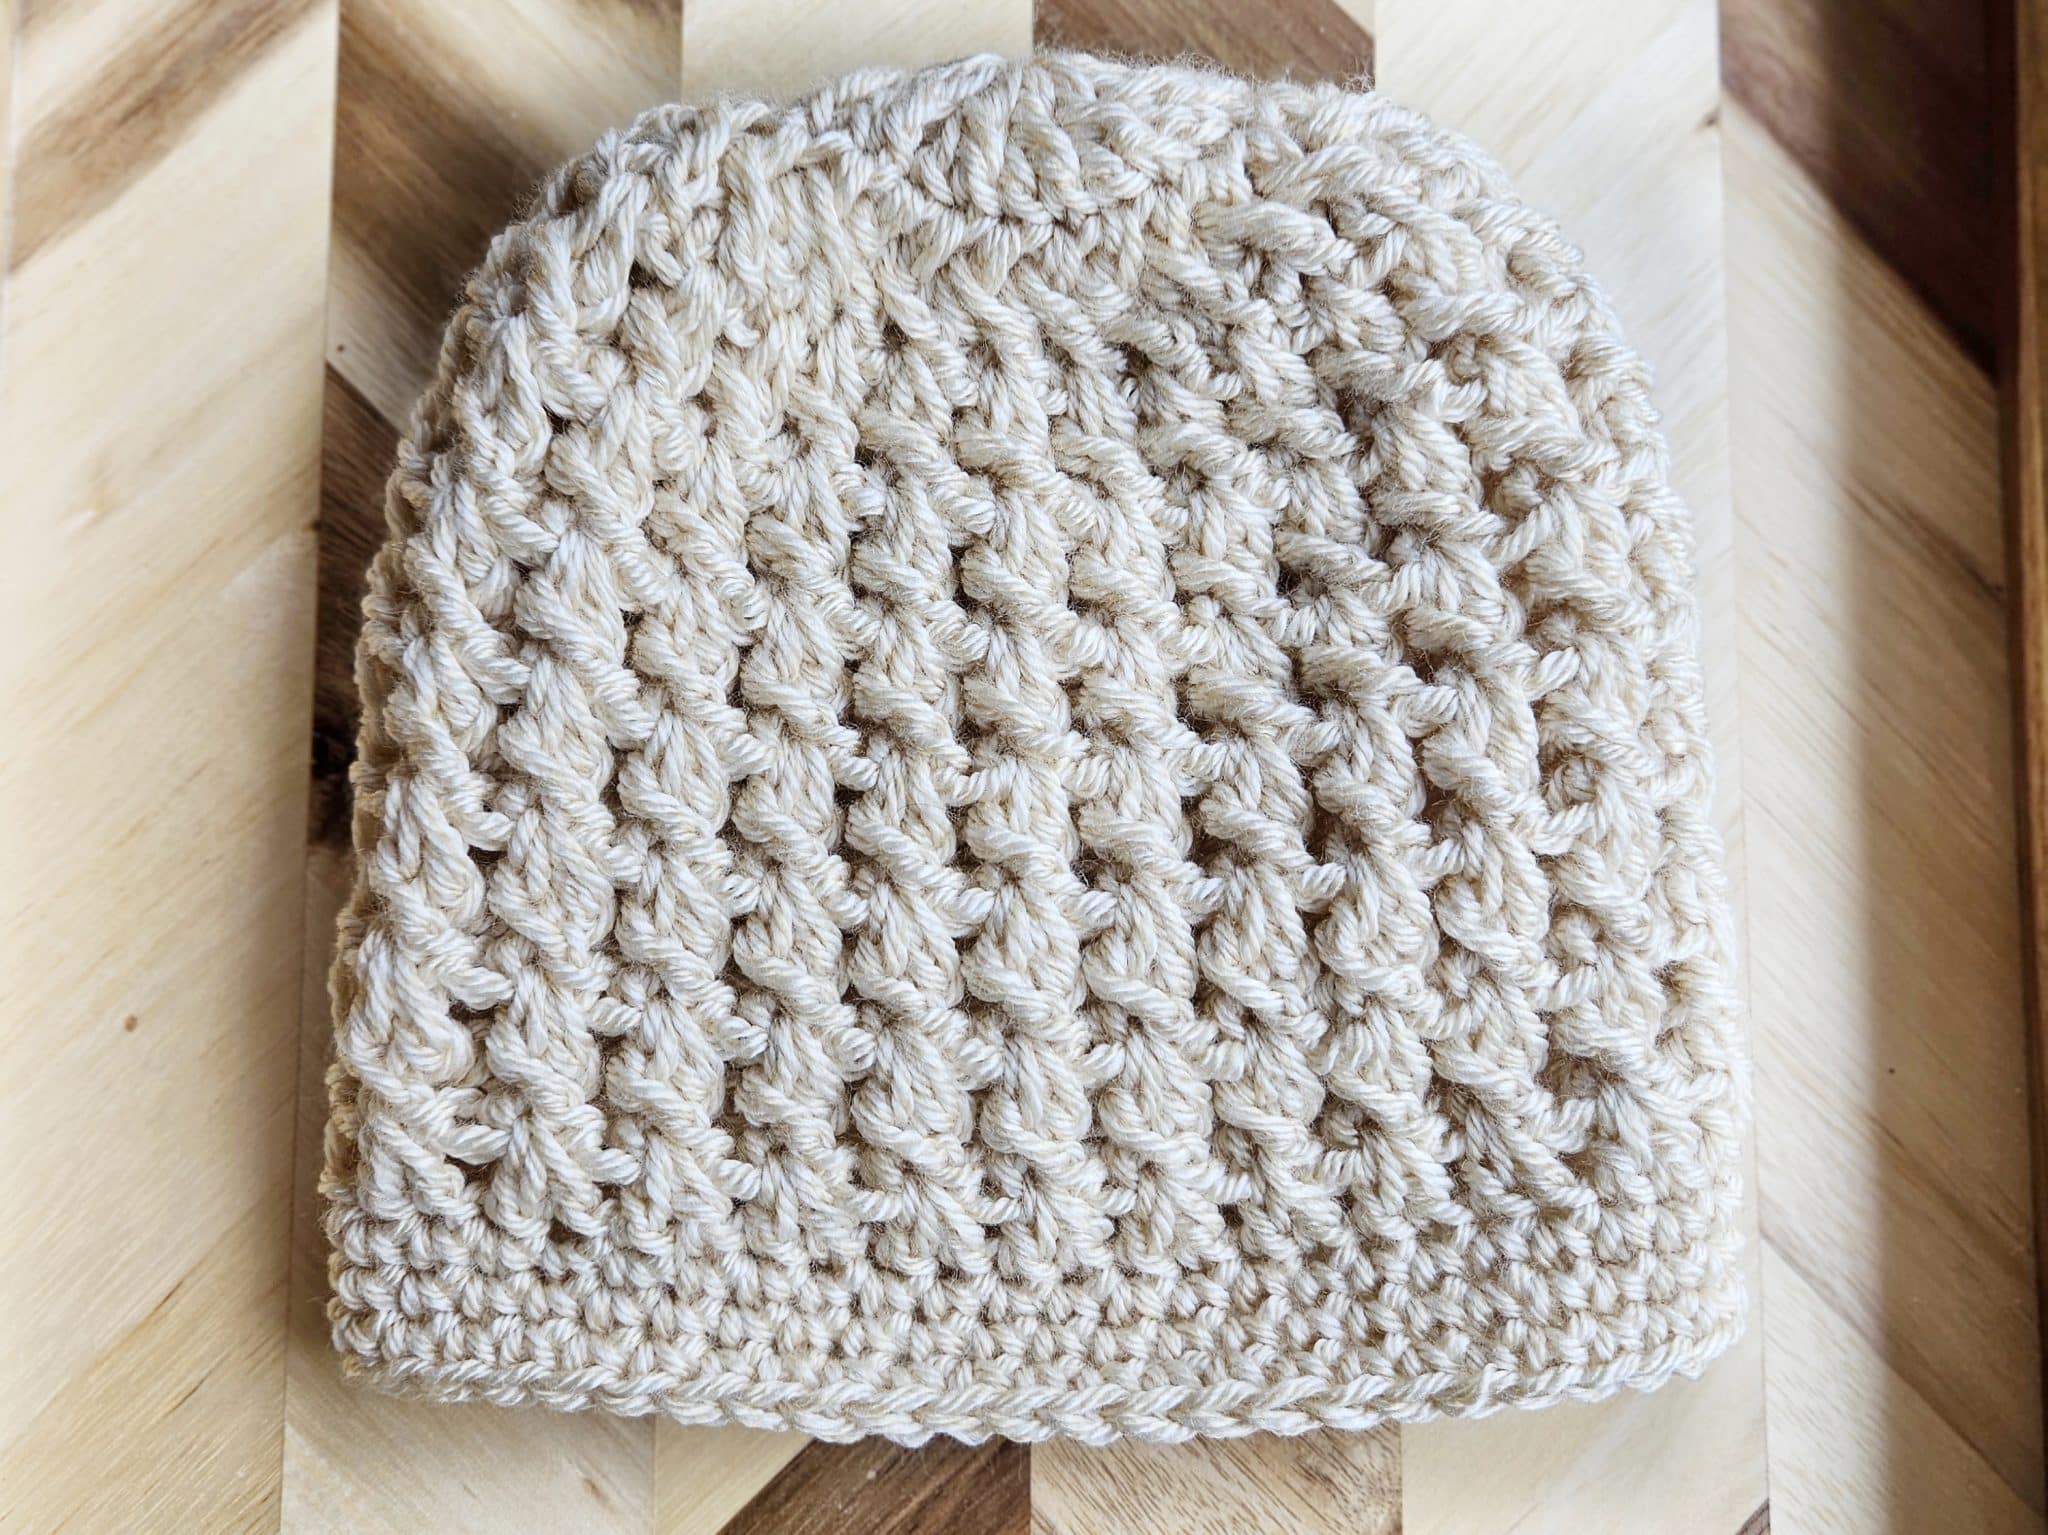 35 Free Easy Crochet Hat Patterns Worsted Yarn to Make - A More Crafty Life